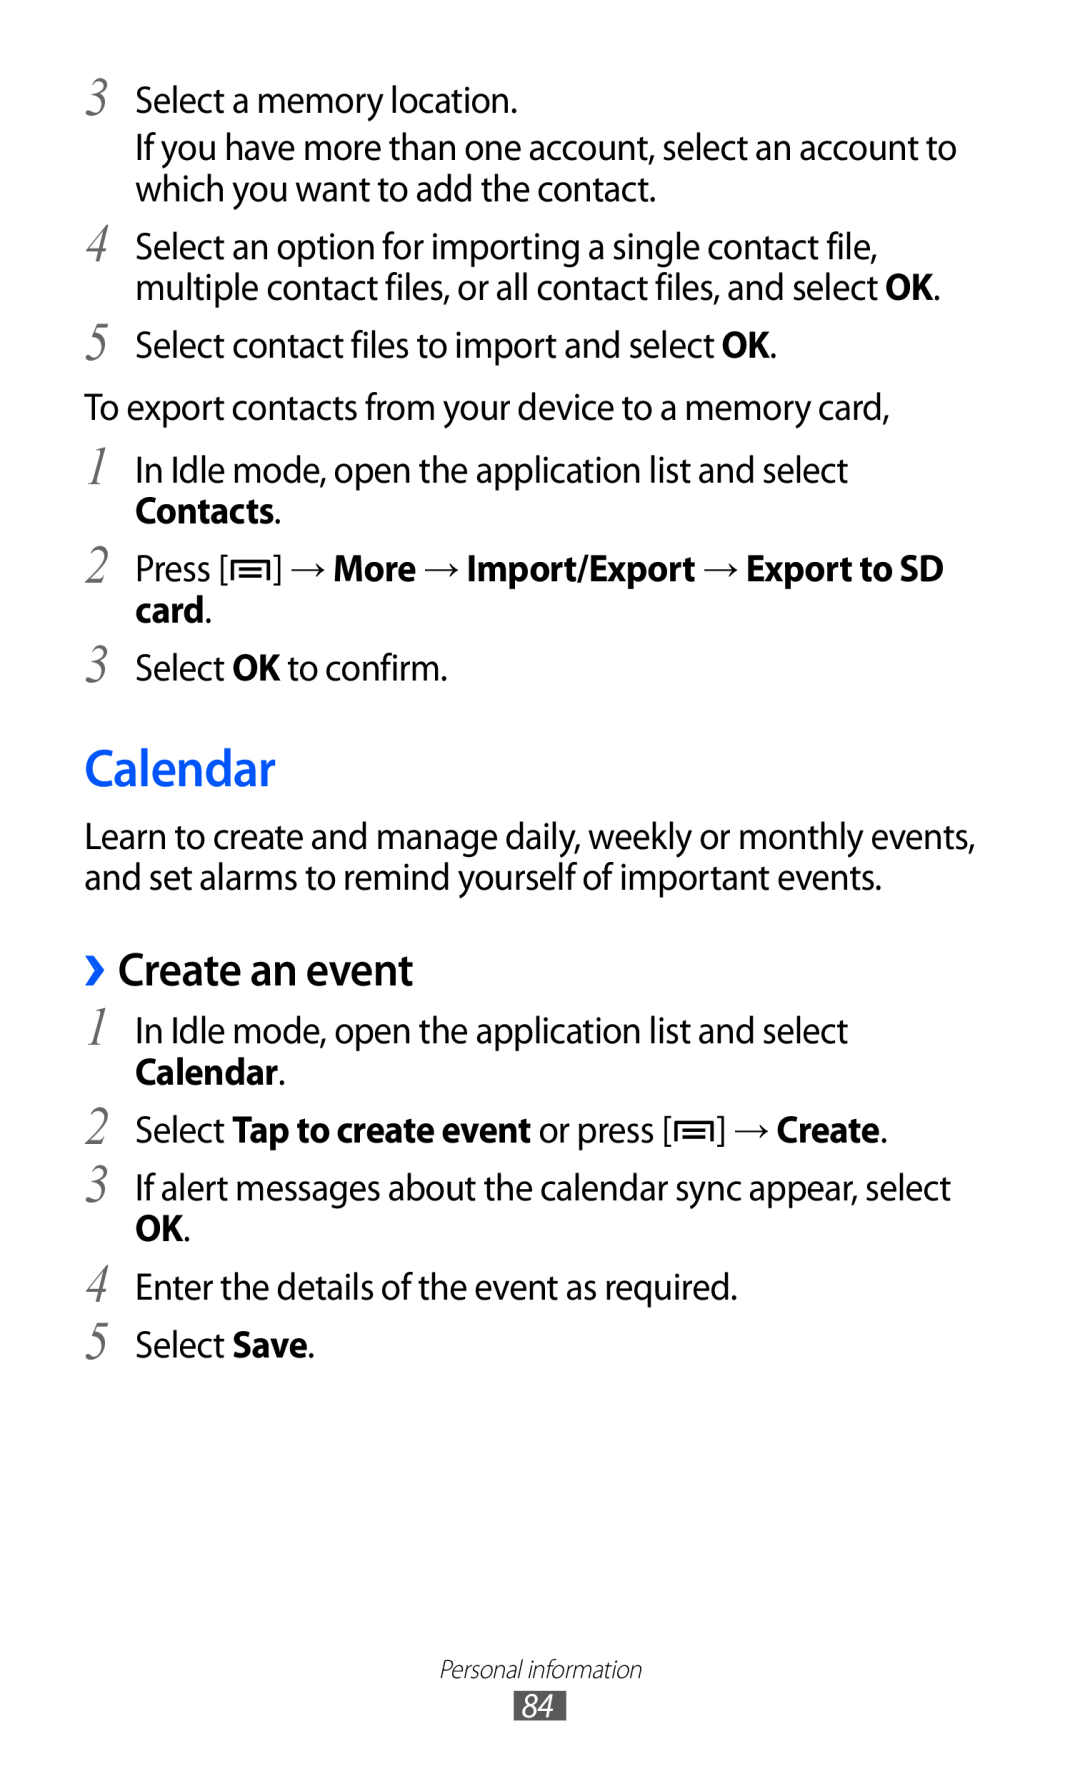 Samsung GT-I9070 user manual Calendar, ››Create an event, Contacts Press → More → Import/Export → Export to SD card 